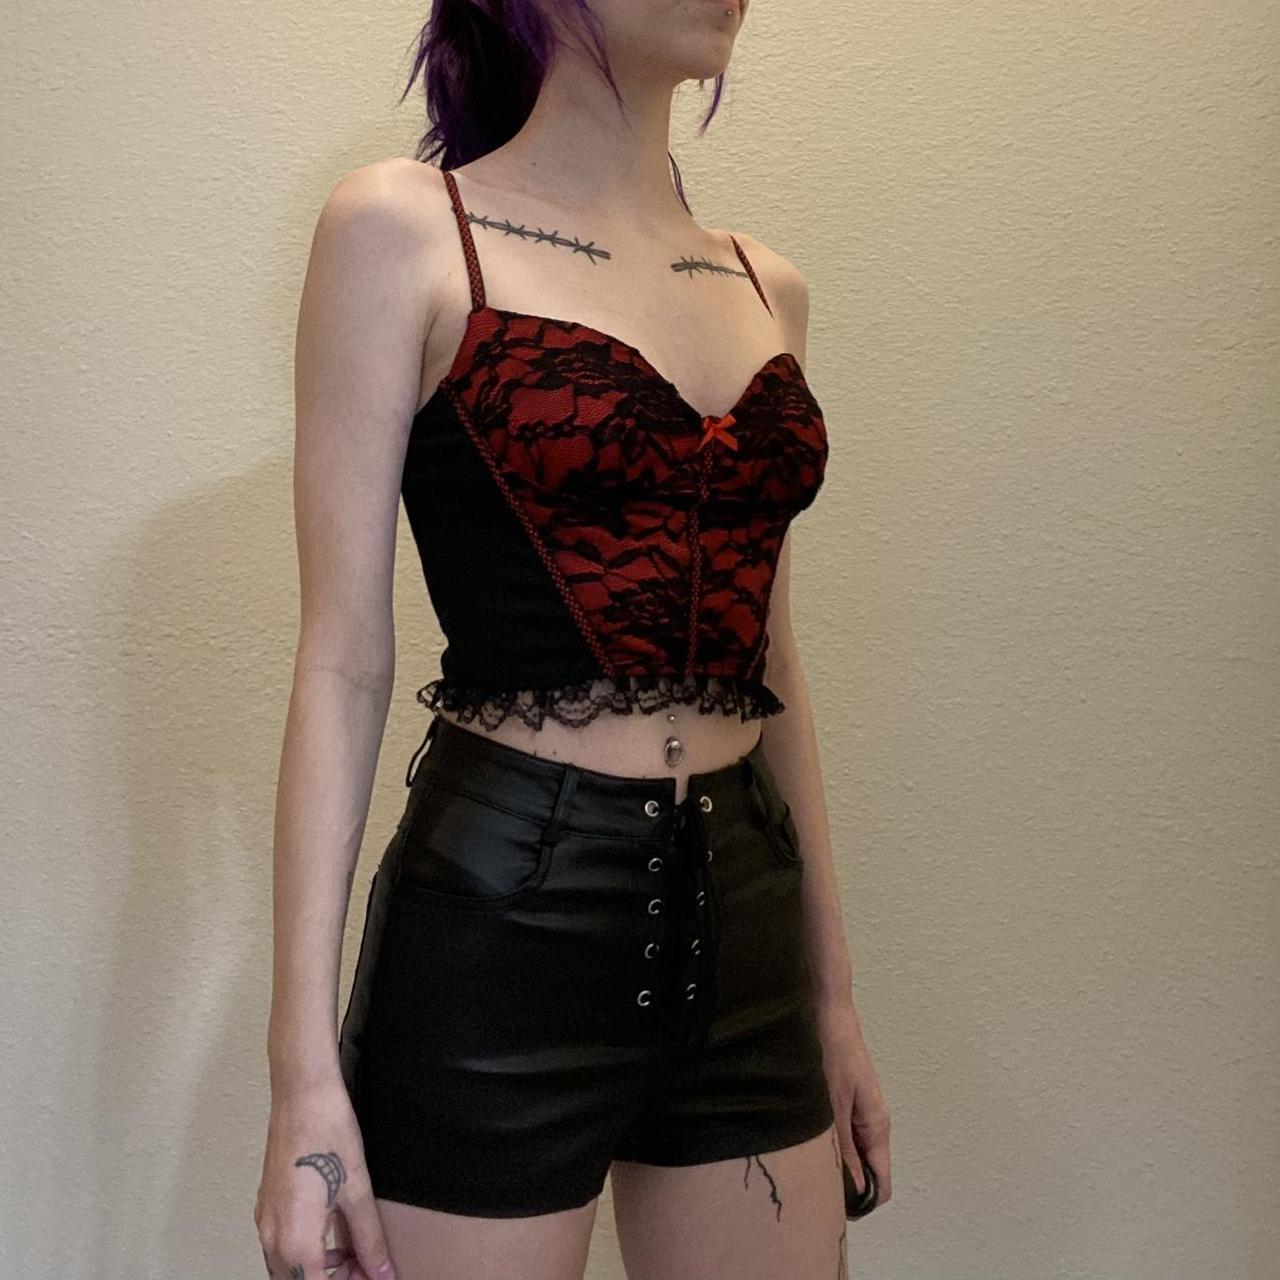 Women's Black and Red Crop-top